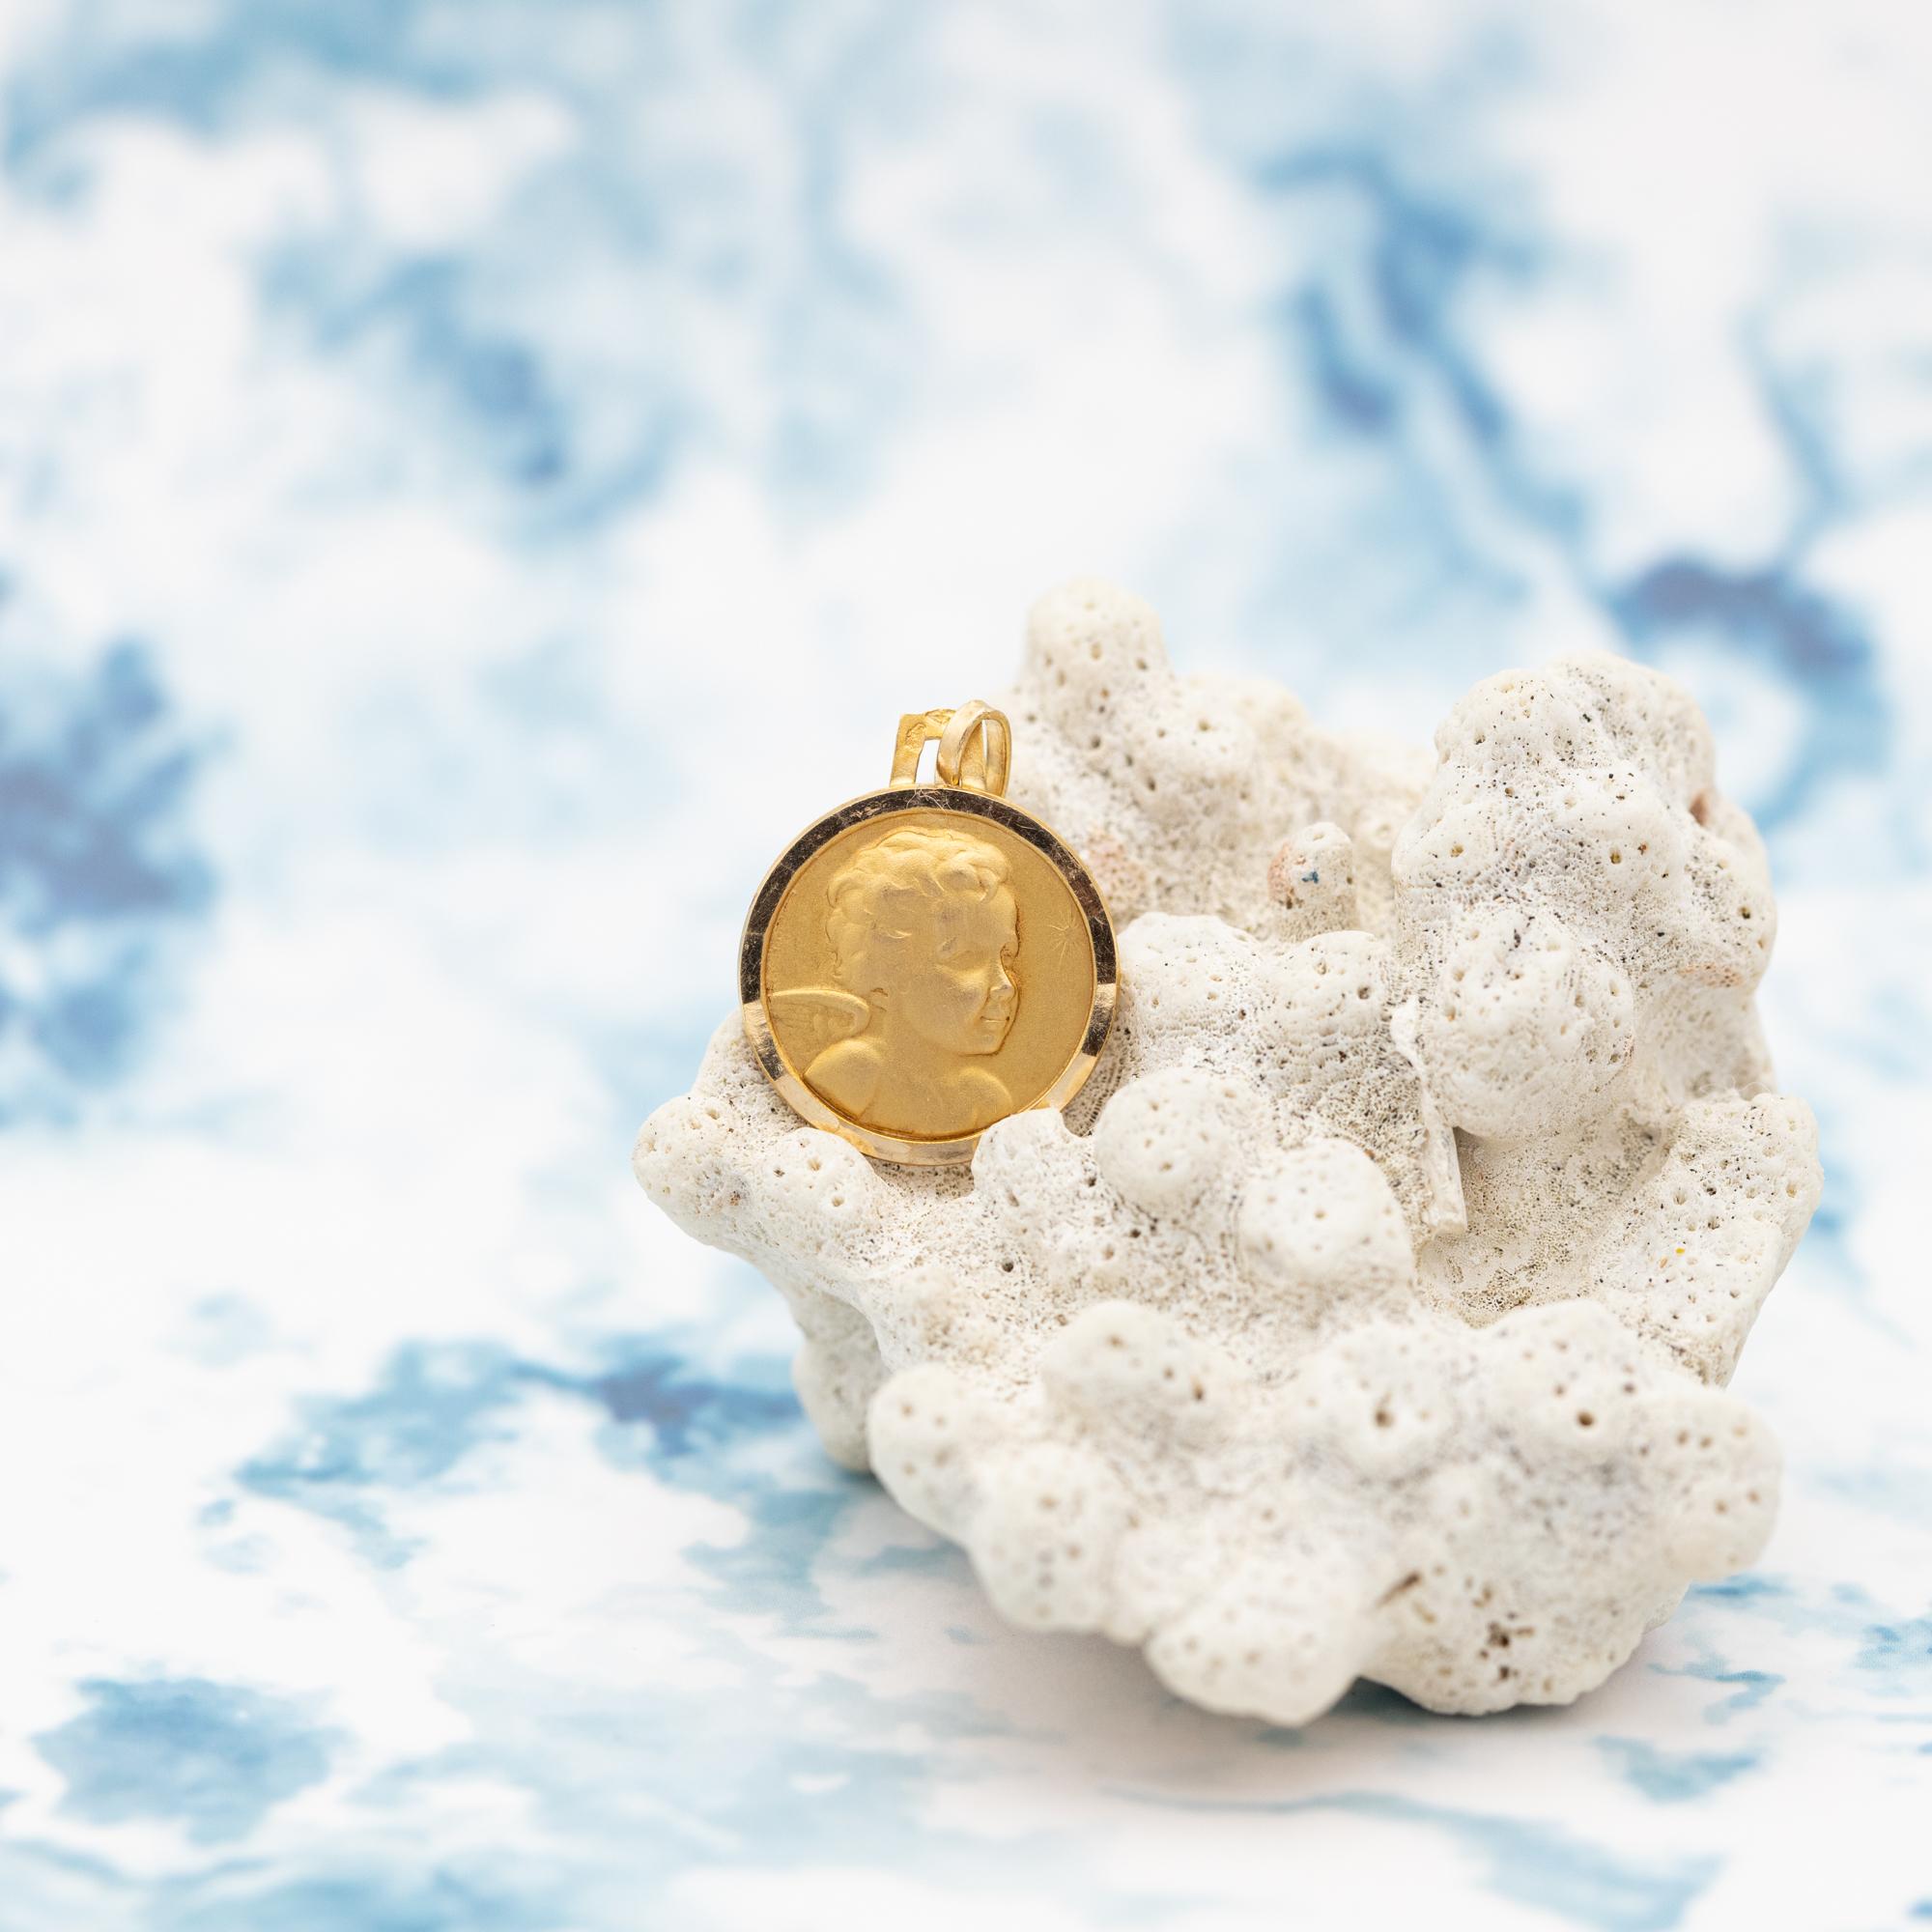 For sale is this 18 K yellow gold cherub pendant. This cute charm depicts a small, cute angel looking at a bright shining star. Thanks to the many details of this little angel his curly hair and cute little face are clearly visible. This lovely